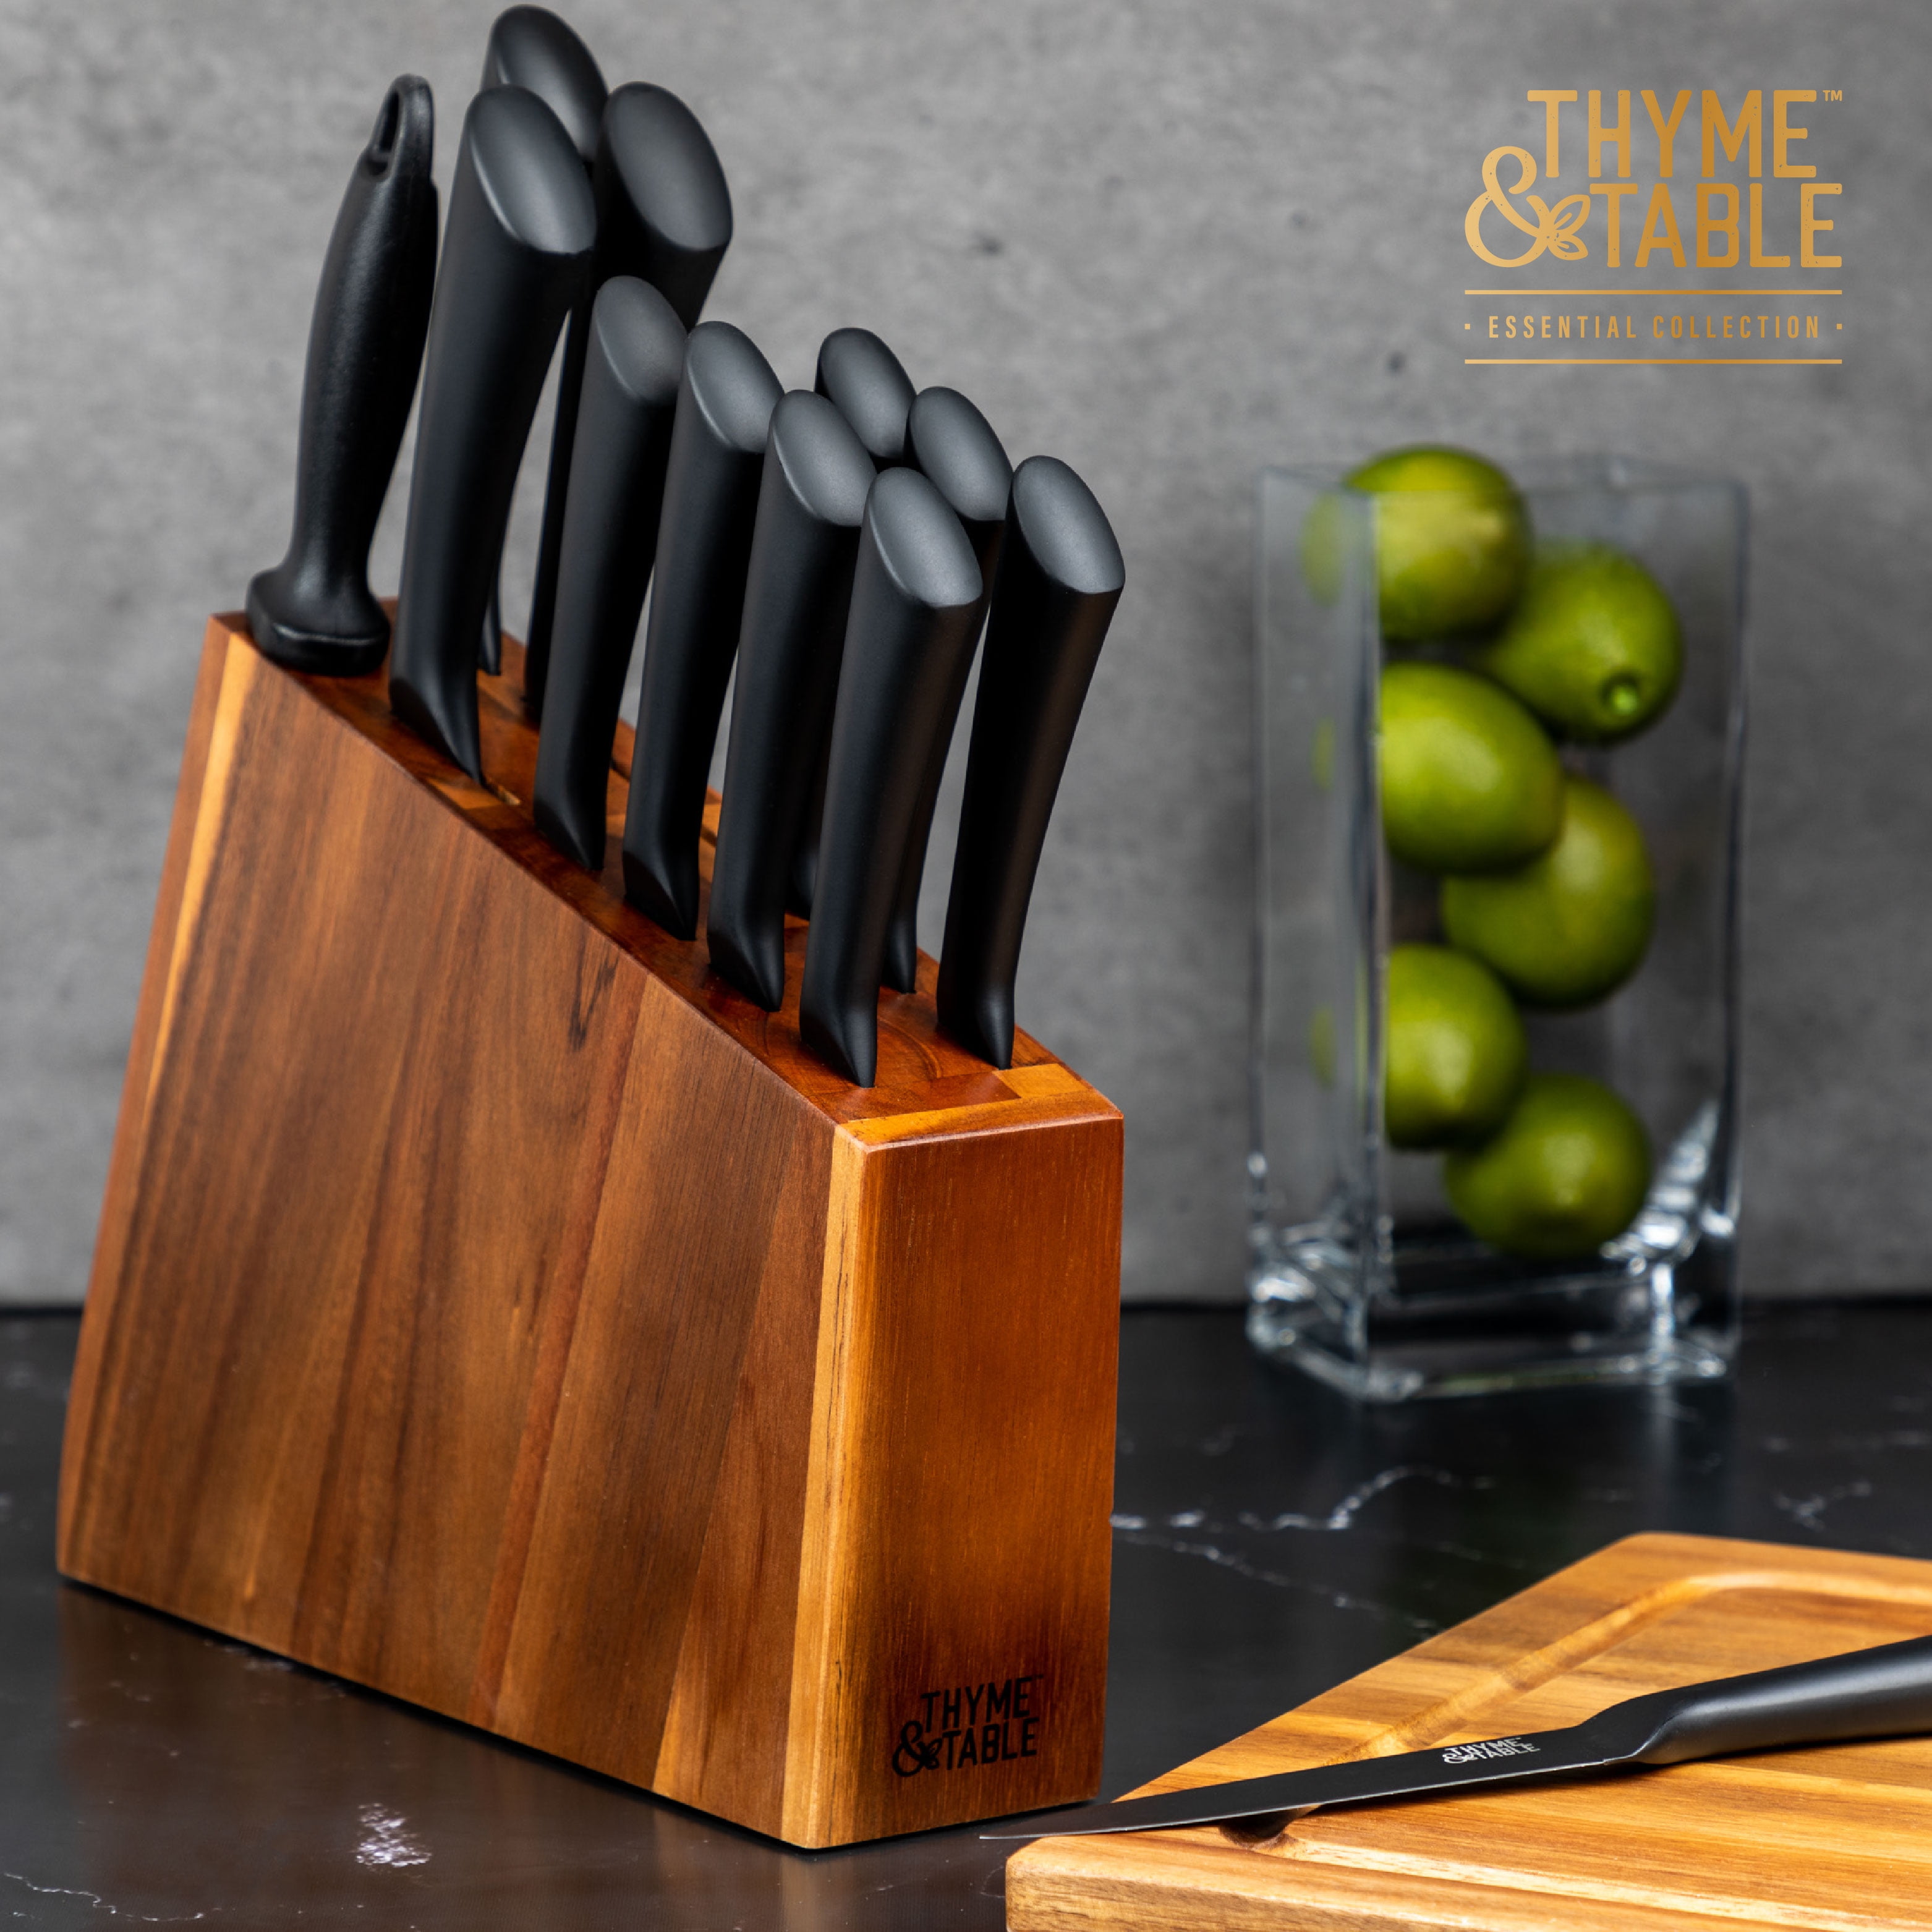 thyme and table knives review｜TikTok Search